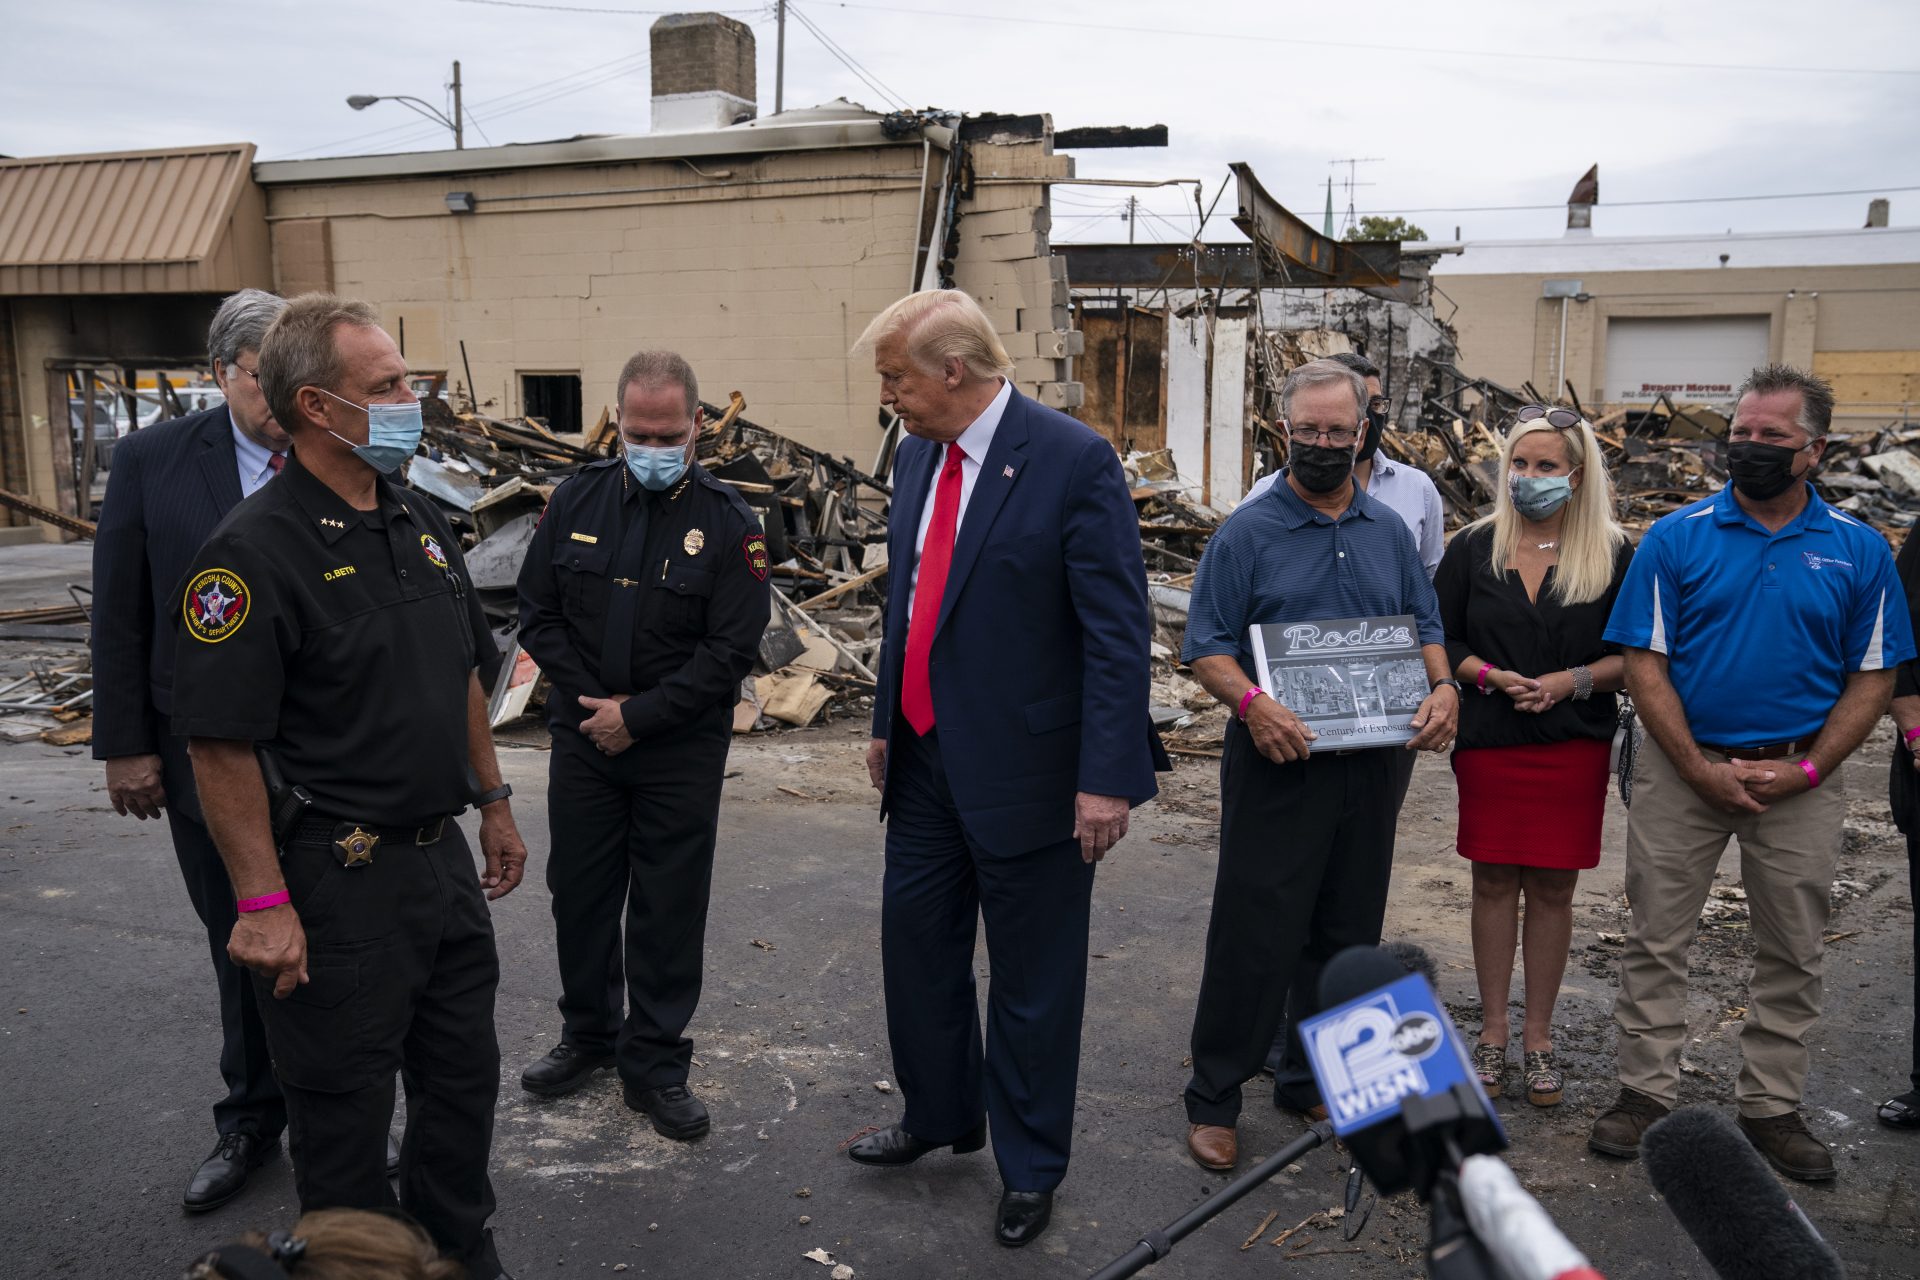 President Donald Trump speaks with business owners and law enforcement officials Tuesday, Sept. 1, 2020, as he tours an area damaged during demonstrations after a police officer shot Jacob Blake in Kenosha, Wis. At left is Kenosha County Sheriff David Beth.